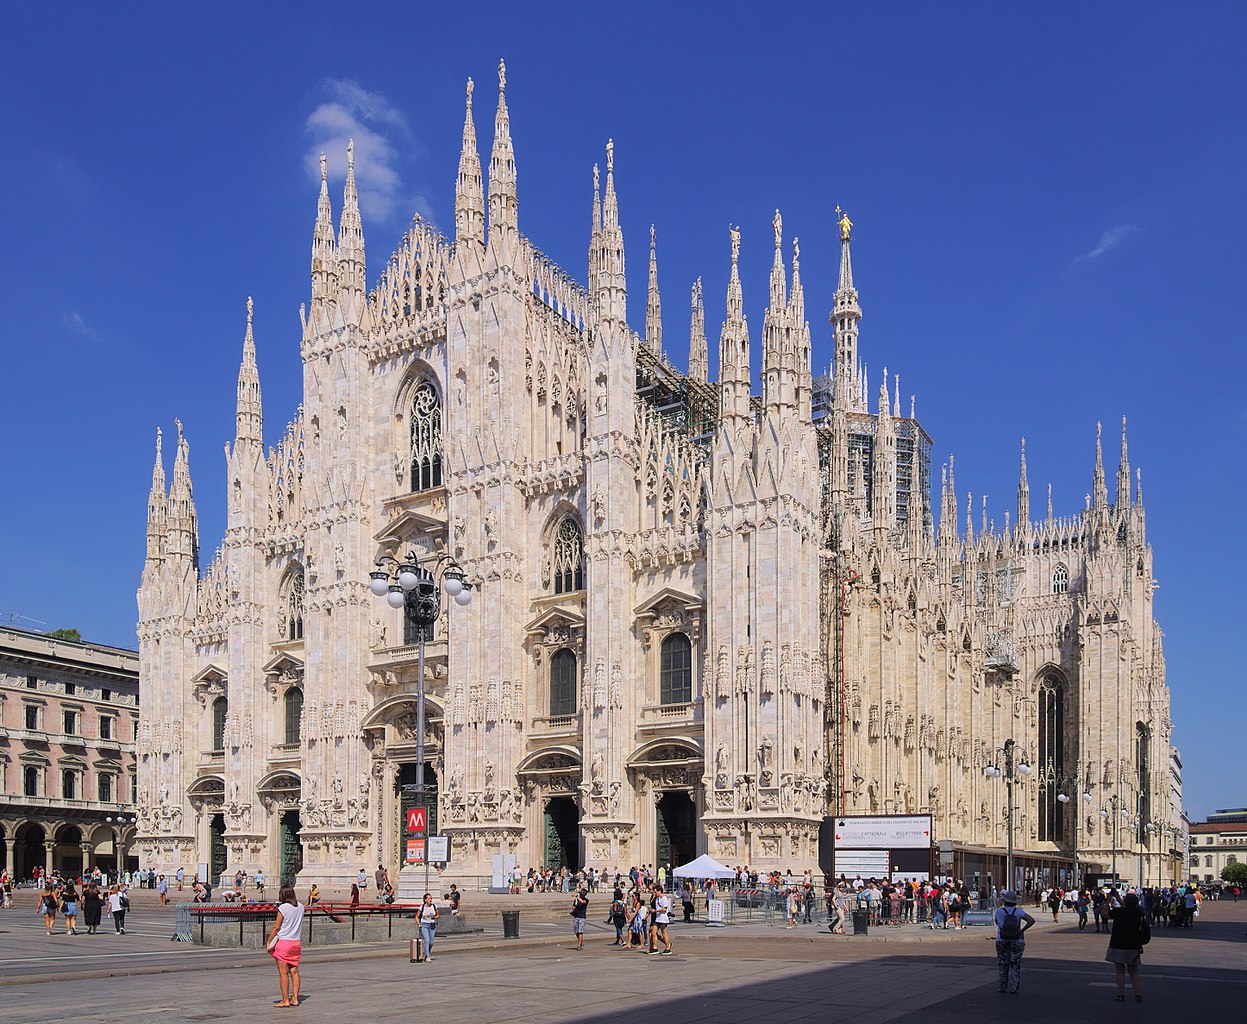 Milan Cathedral. Image courtesy of Wikimedia Commons